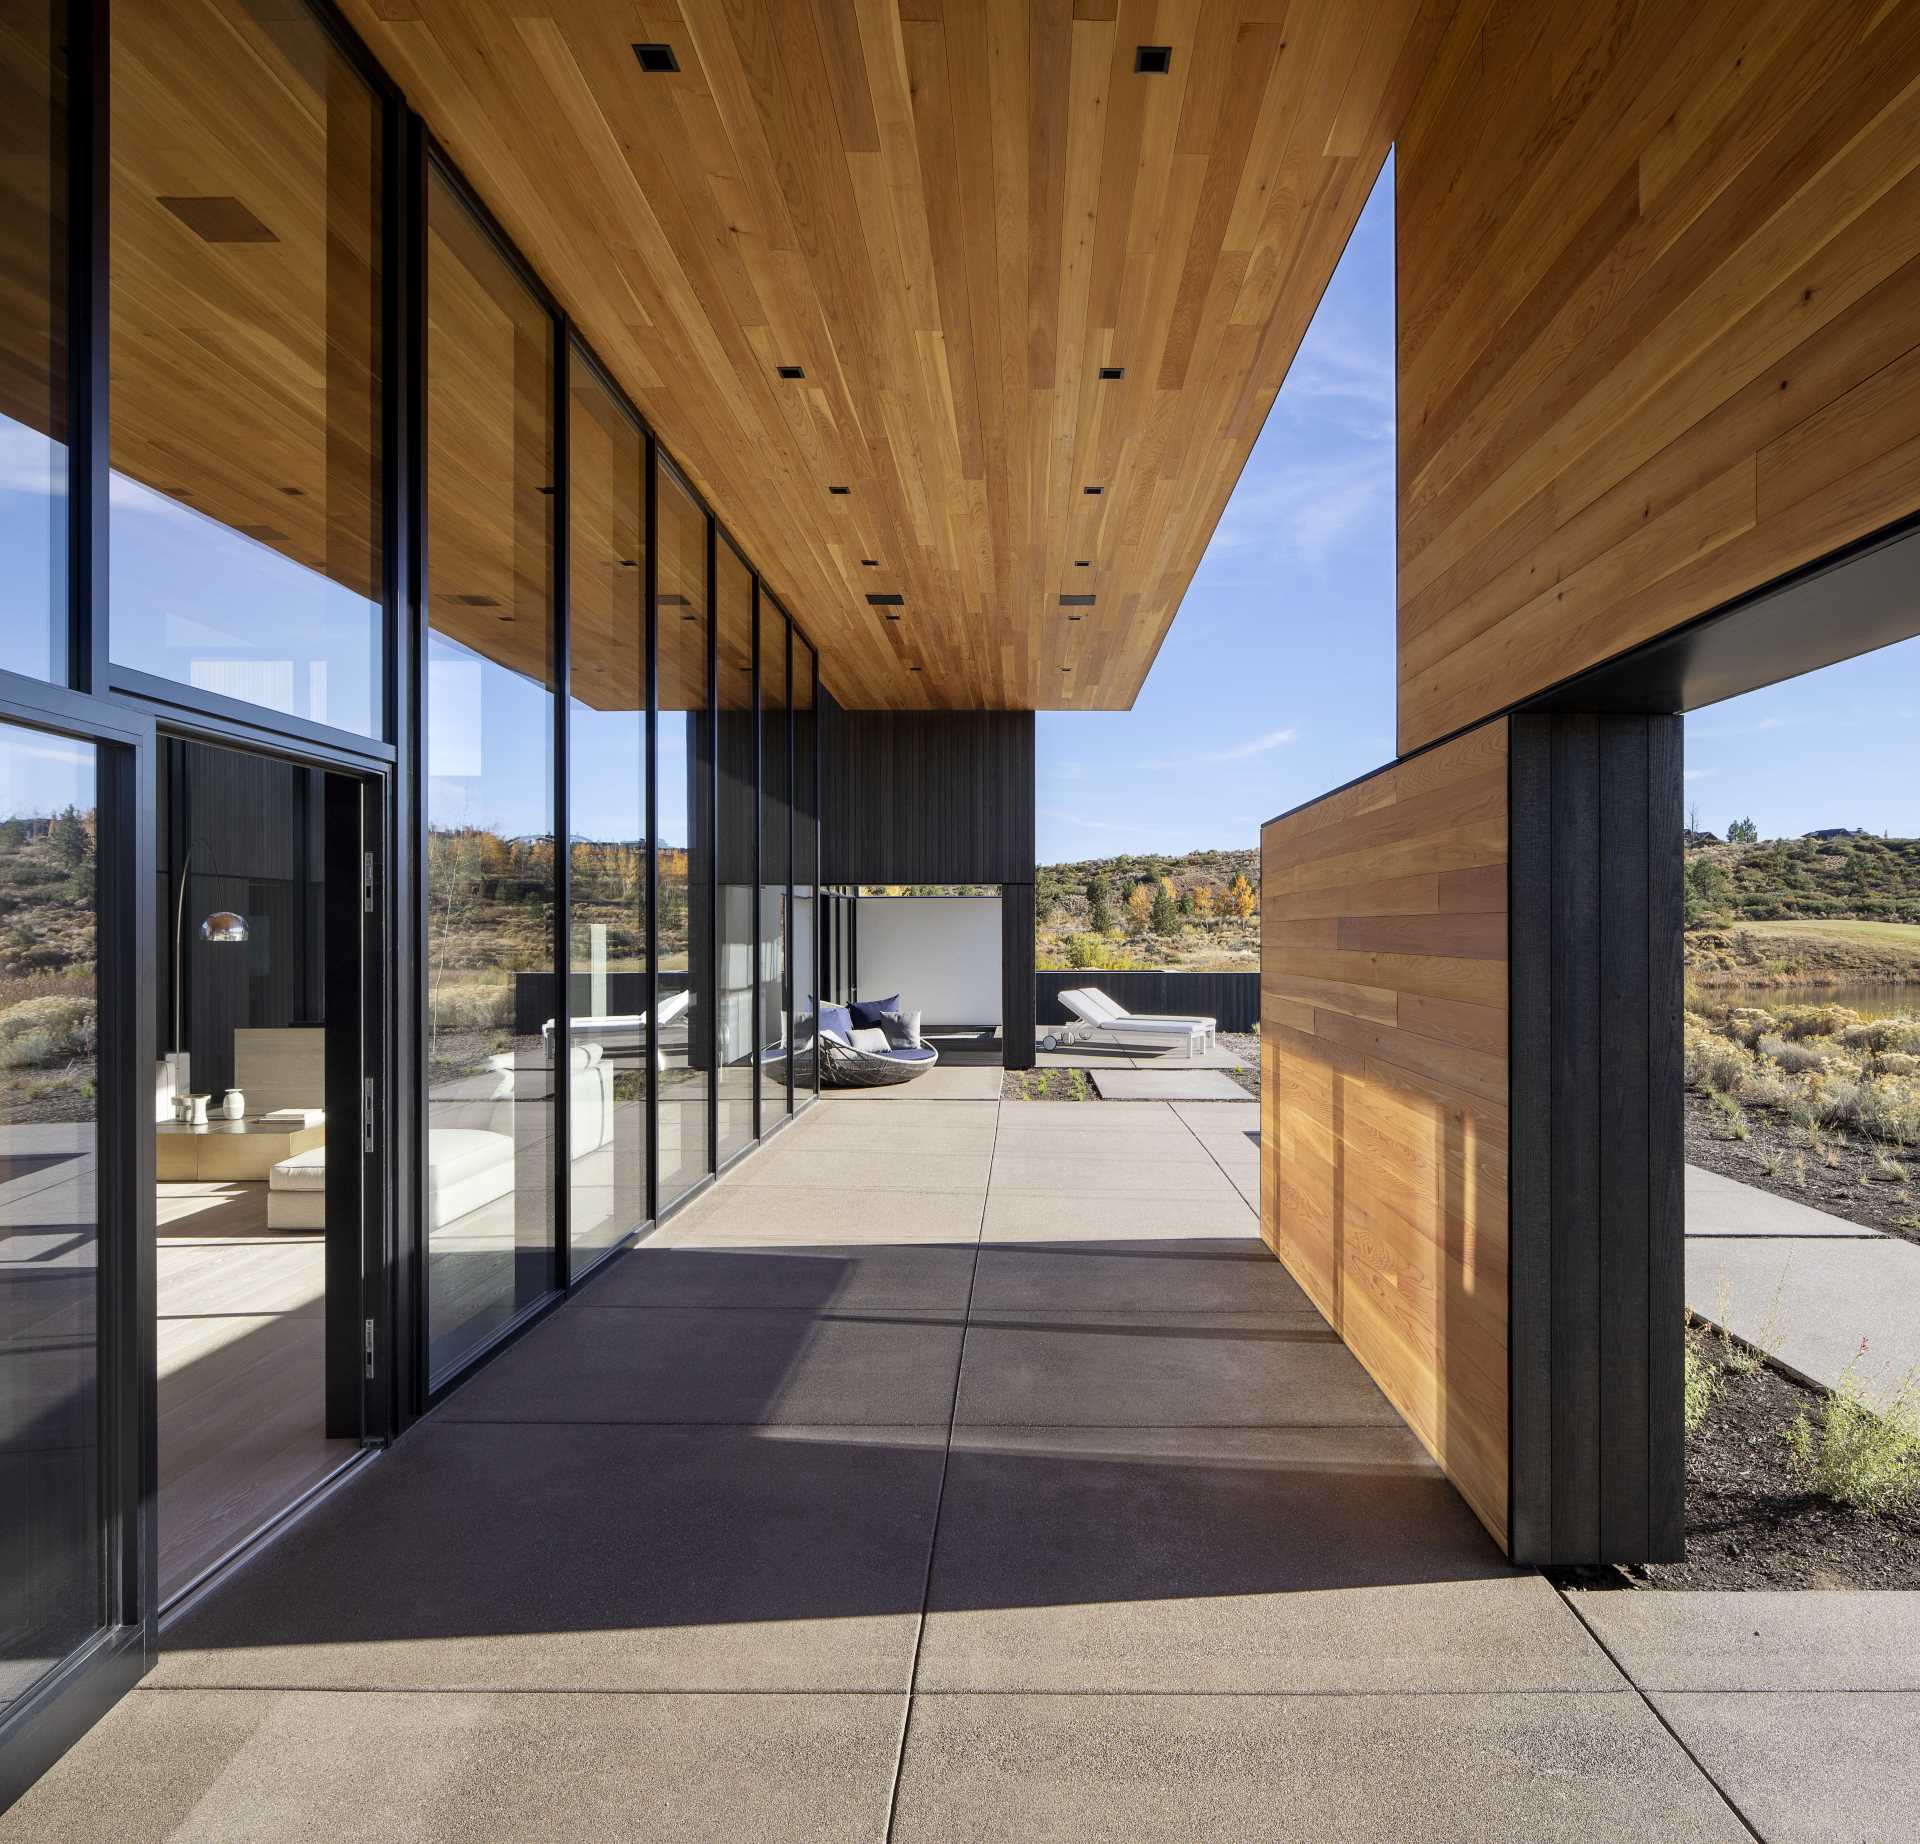 The covered patio of this modern home provides a place to enjoy the uninterrupted views.